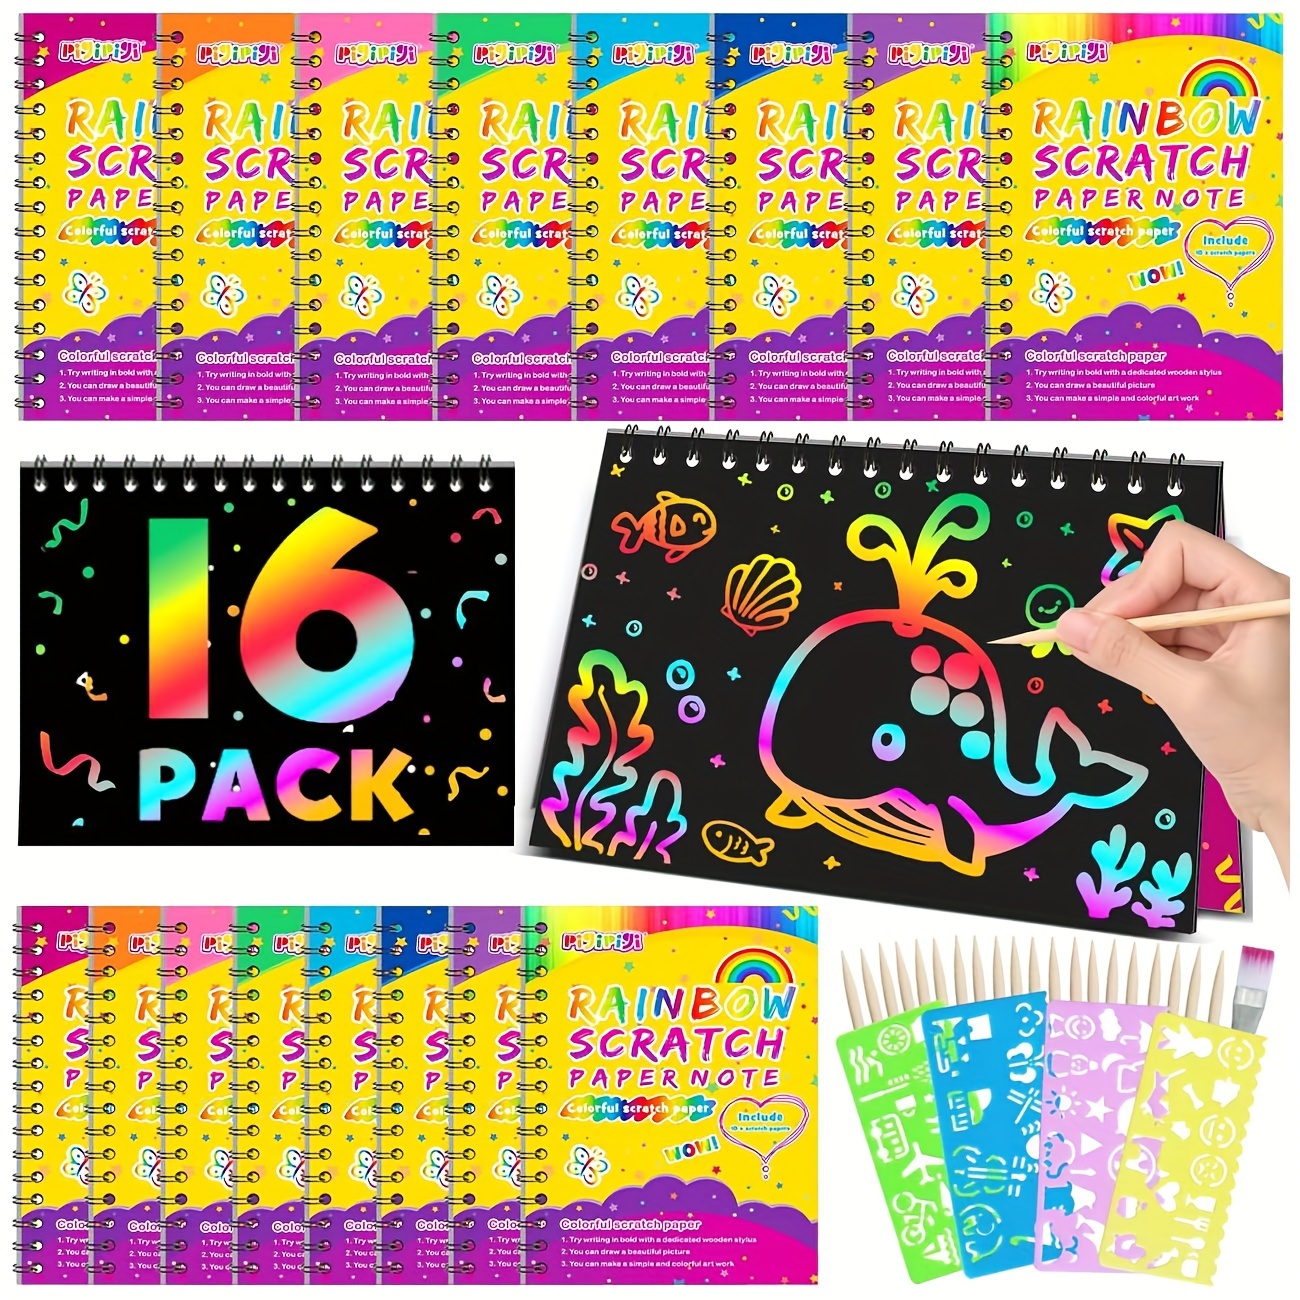 4 Pack Rainbow Scratch Notebook Bulk Party Favors for Kids Goodie Bags  Prize Box Toys for Kids Classroom School Supplies Christmas Gifts Kids  Crafts